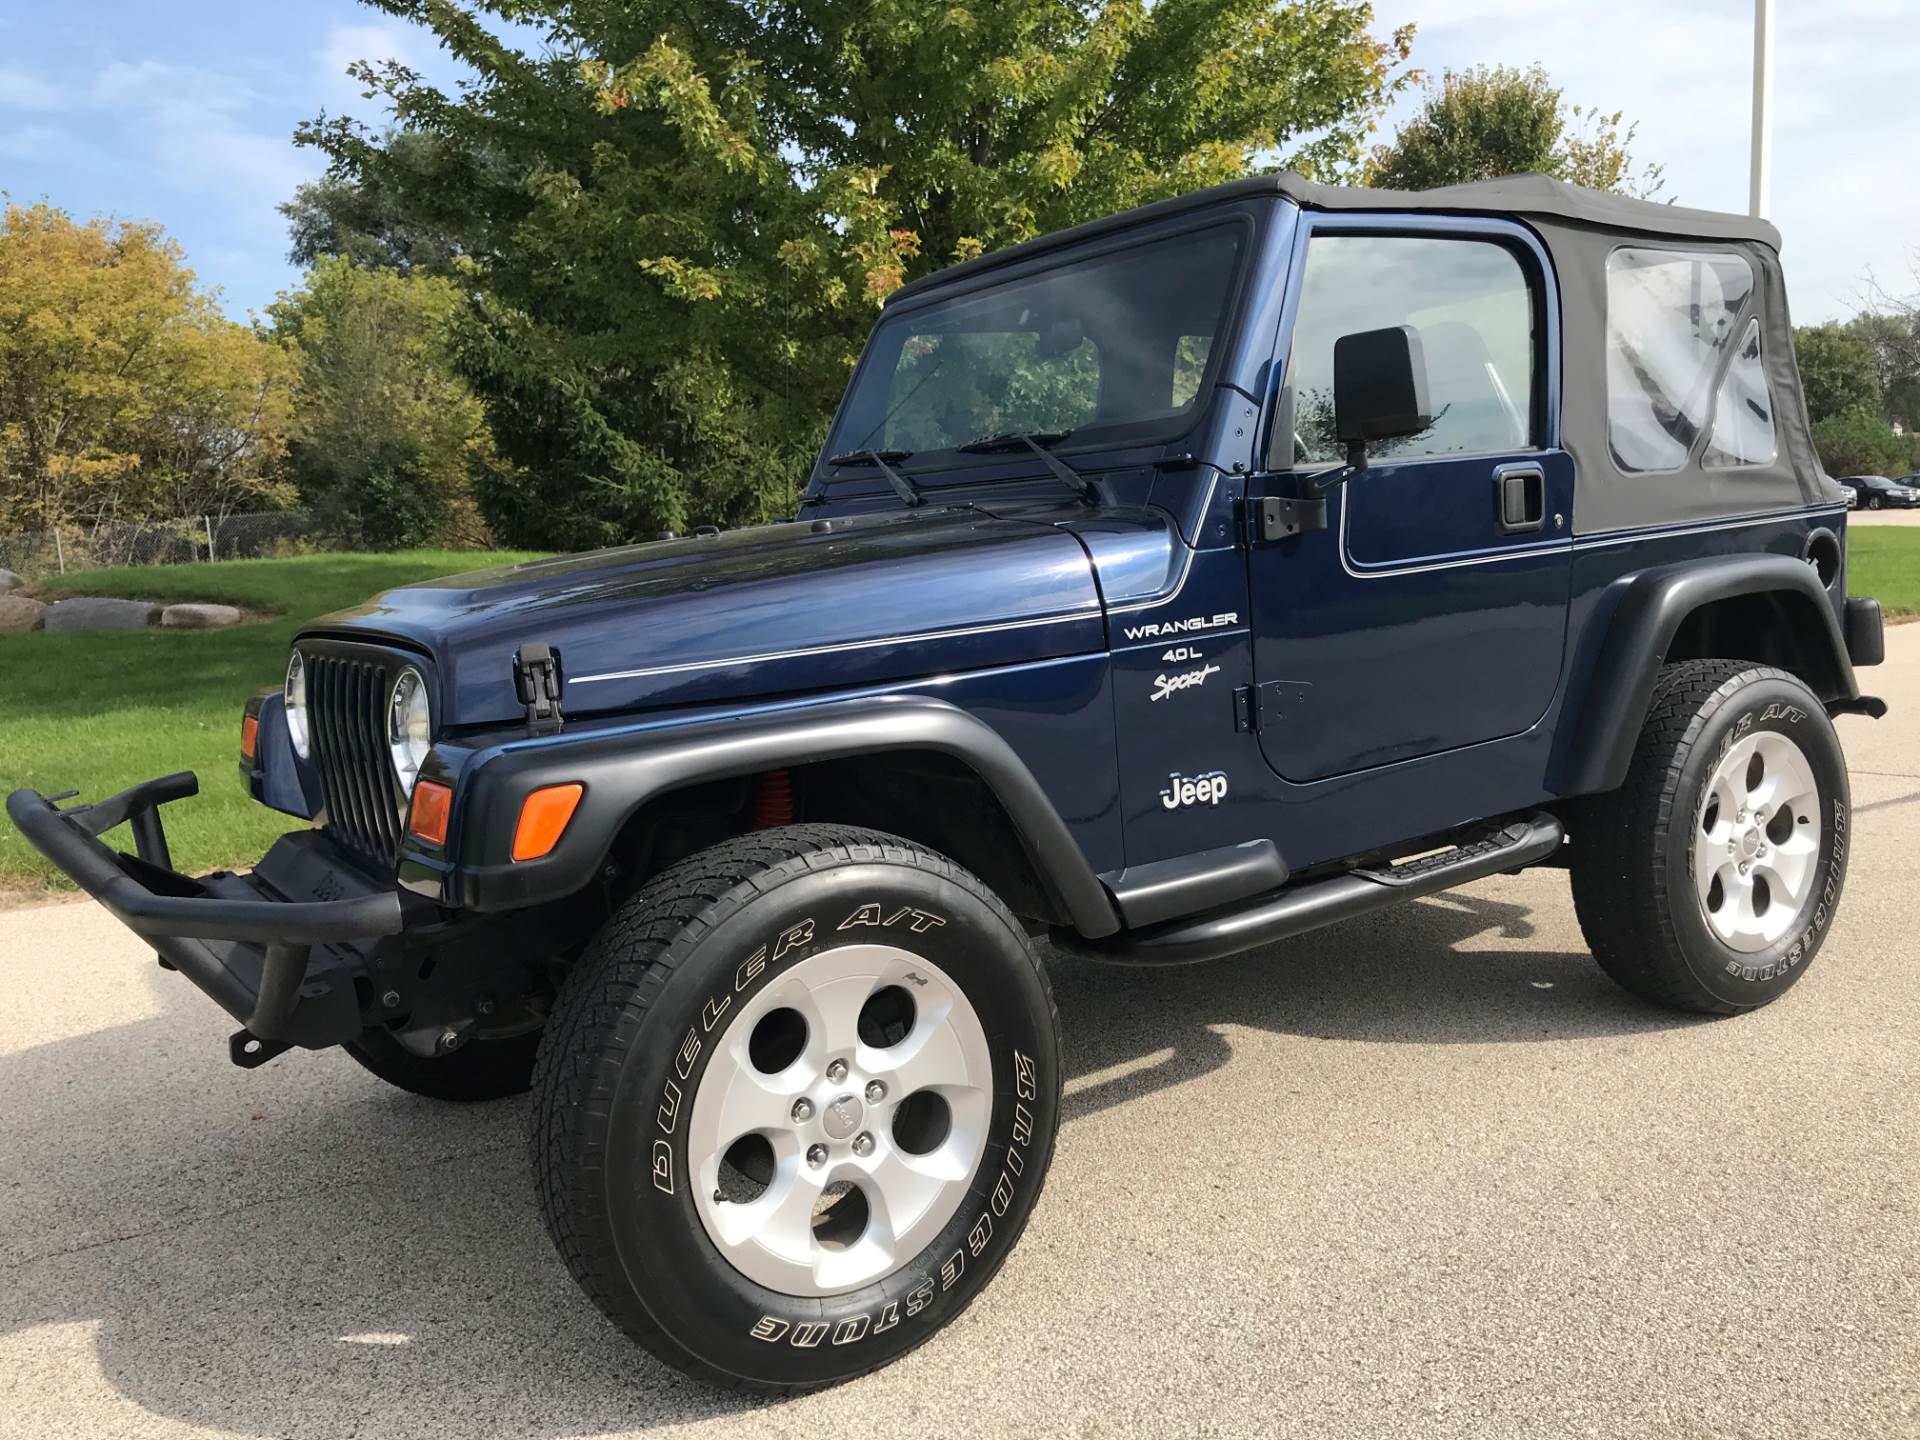 2000 Jeep Wrangler Sport 2dr 4WD SUV in Big Bend, Wisconsin - Photo 21